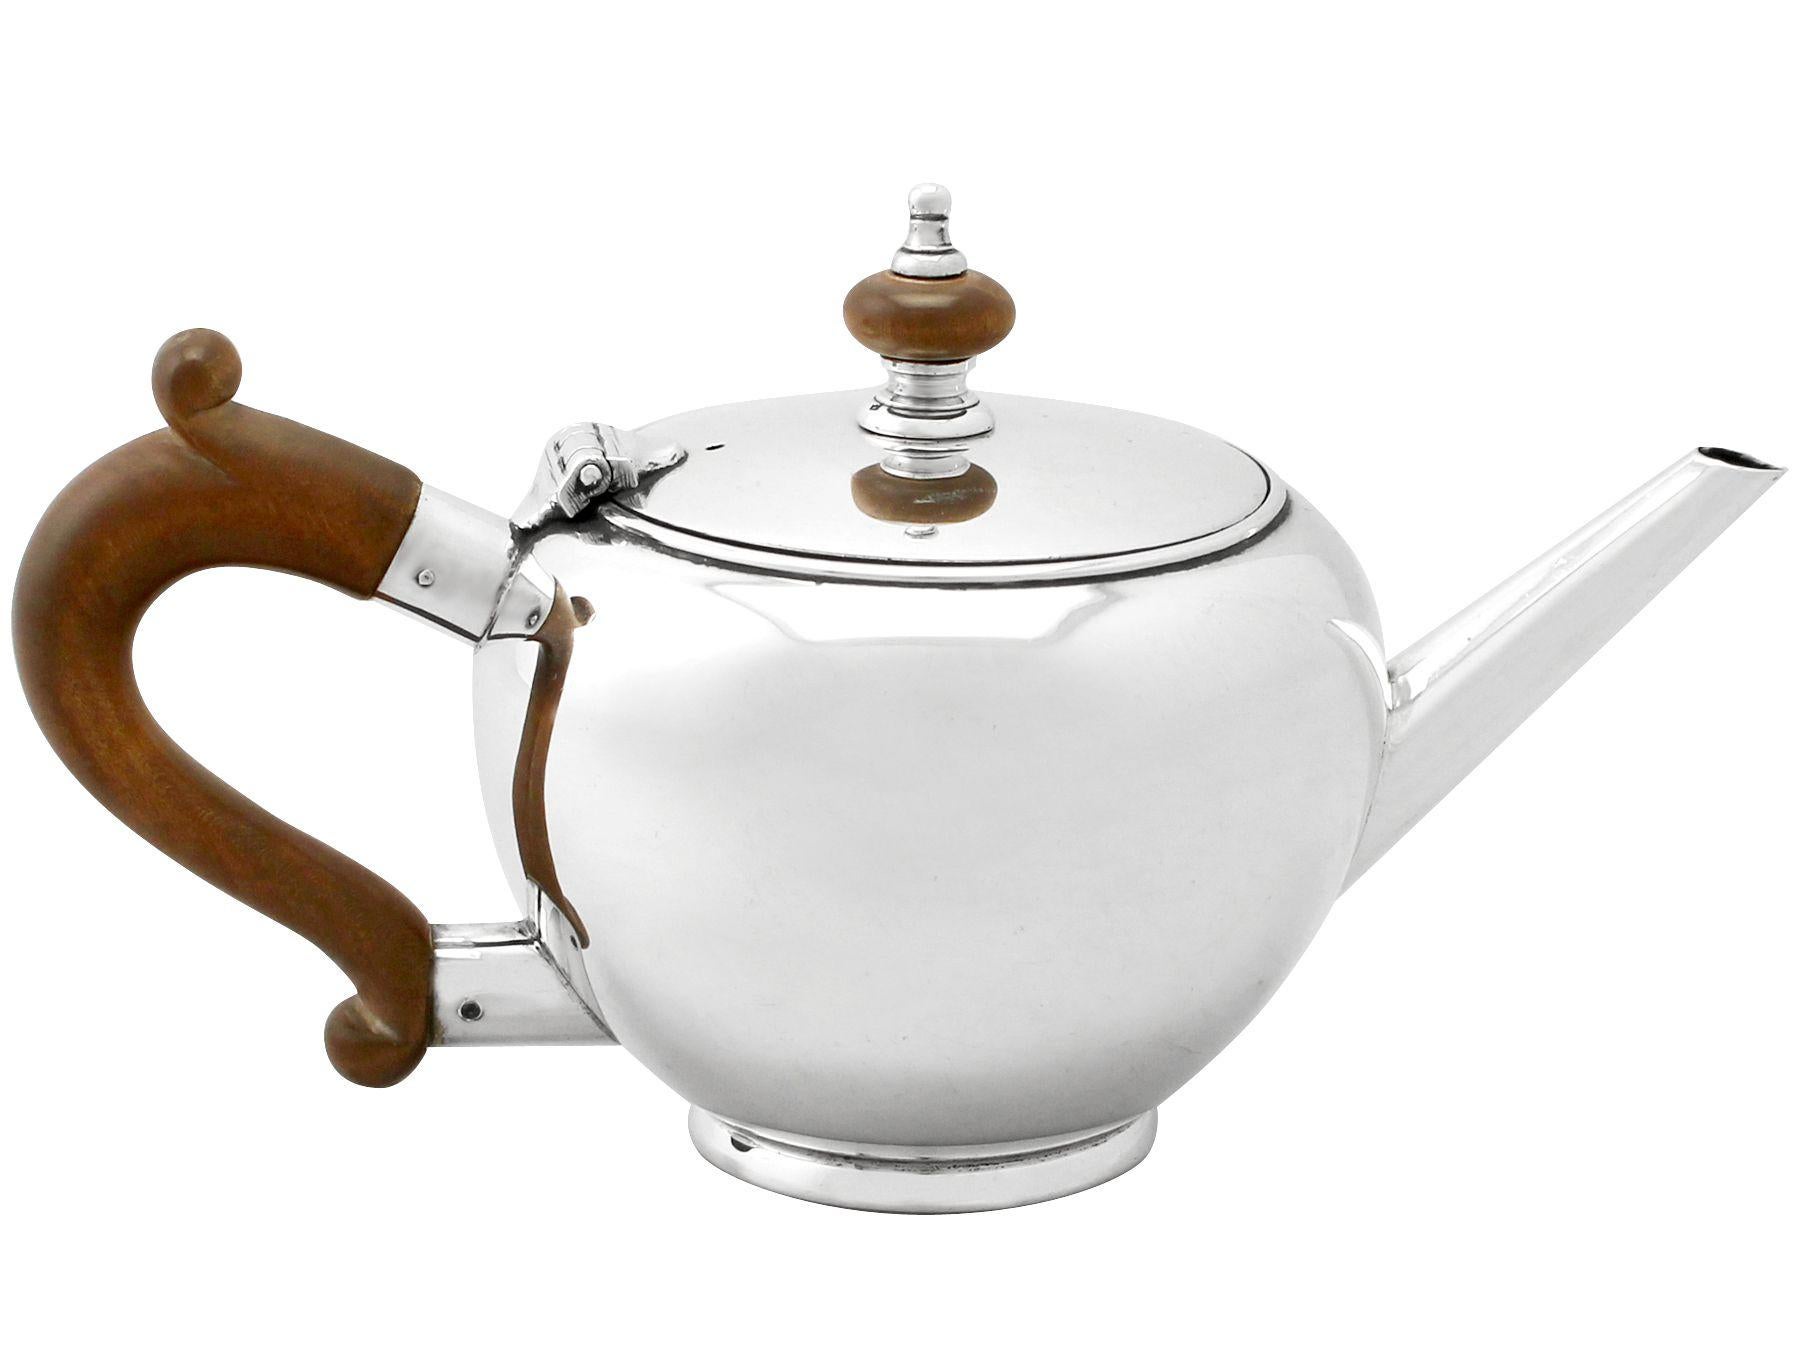 A fine and impressive vintage Elizabeth II English sterling silver bachelor teapot, in the George I style; an addition to our silver teaware collection.

This fine vintage Elizabeth II sterling silver bachelor teapot has a bullet shaped form onto a